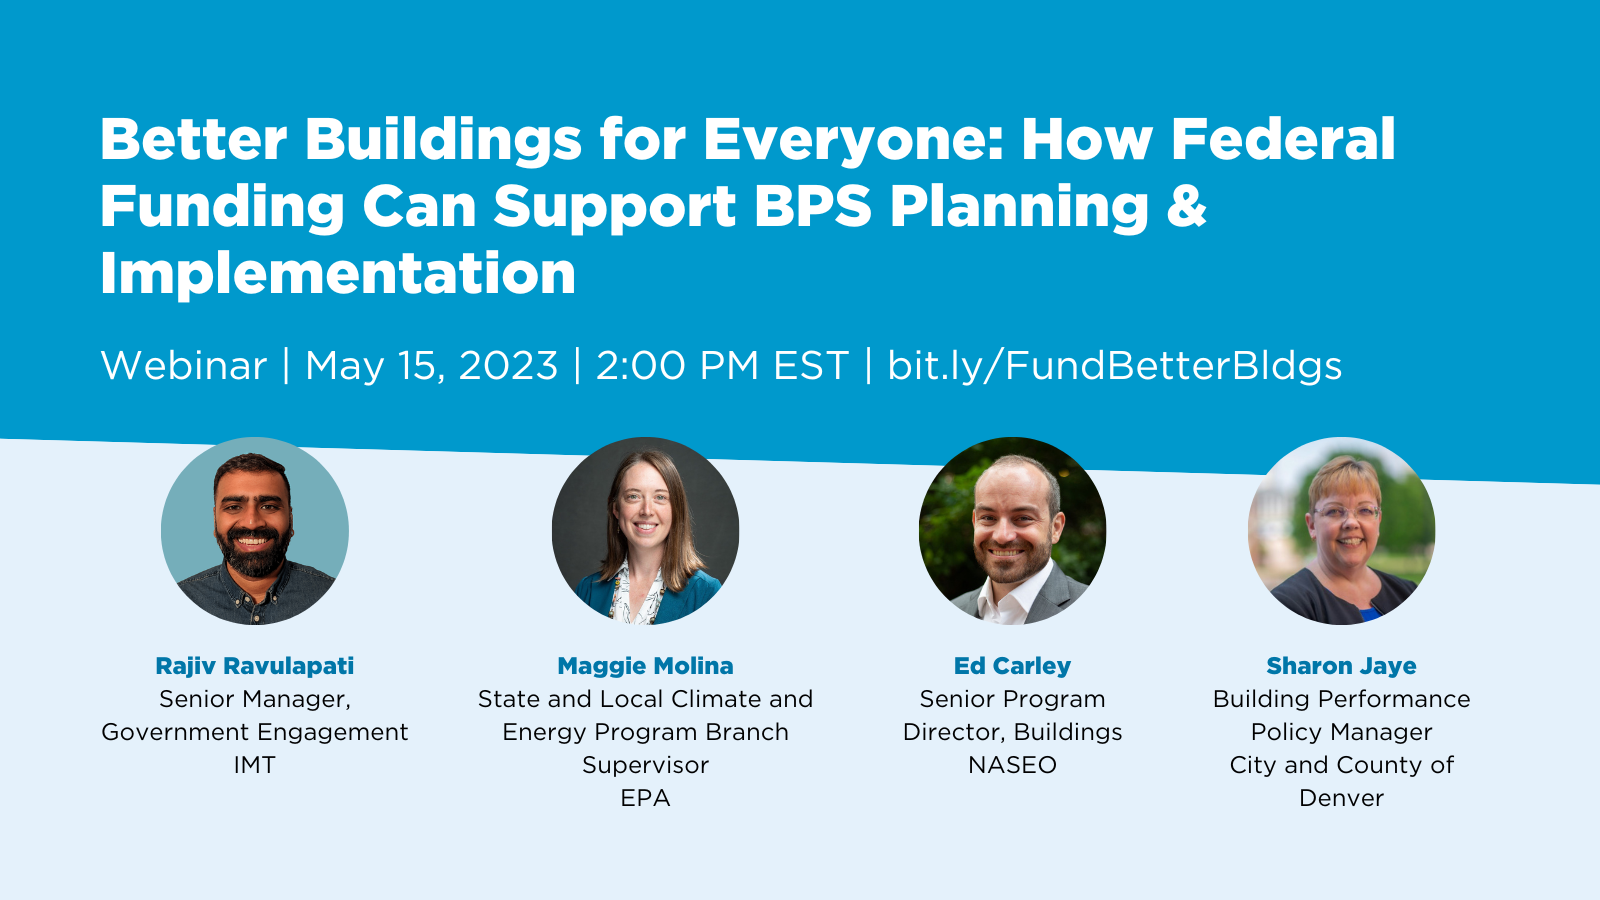 Please register via Zoom for the Monday, May 15 at 2 pm EST event: https://bit.ly/FundBetterBldgs